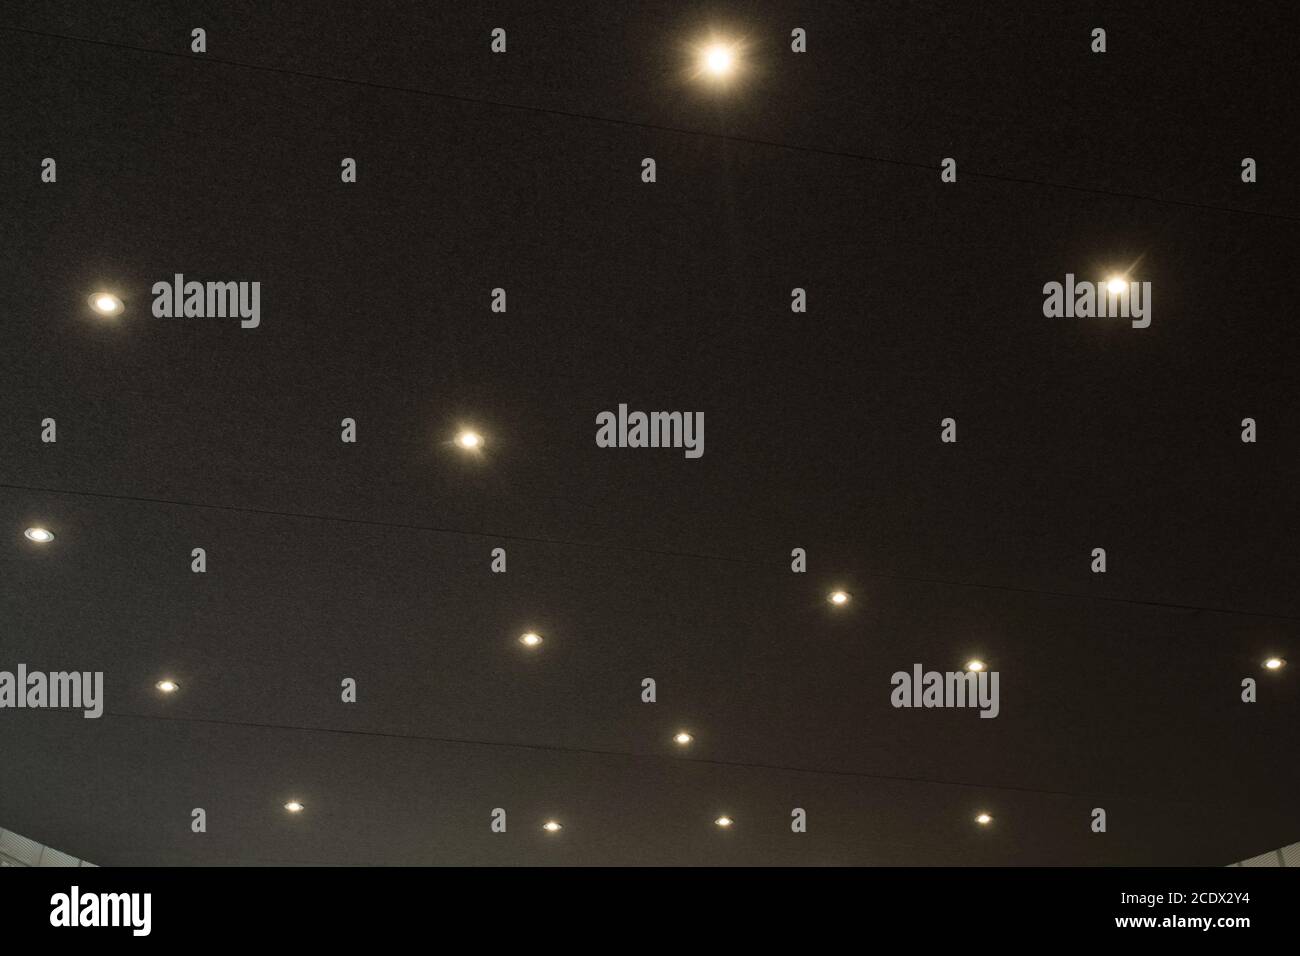 ceiling spots, starry ceiling Led panel close-up Stock Photo